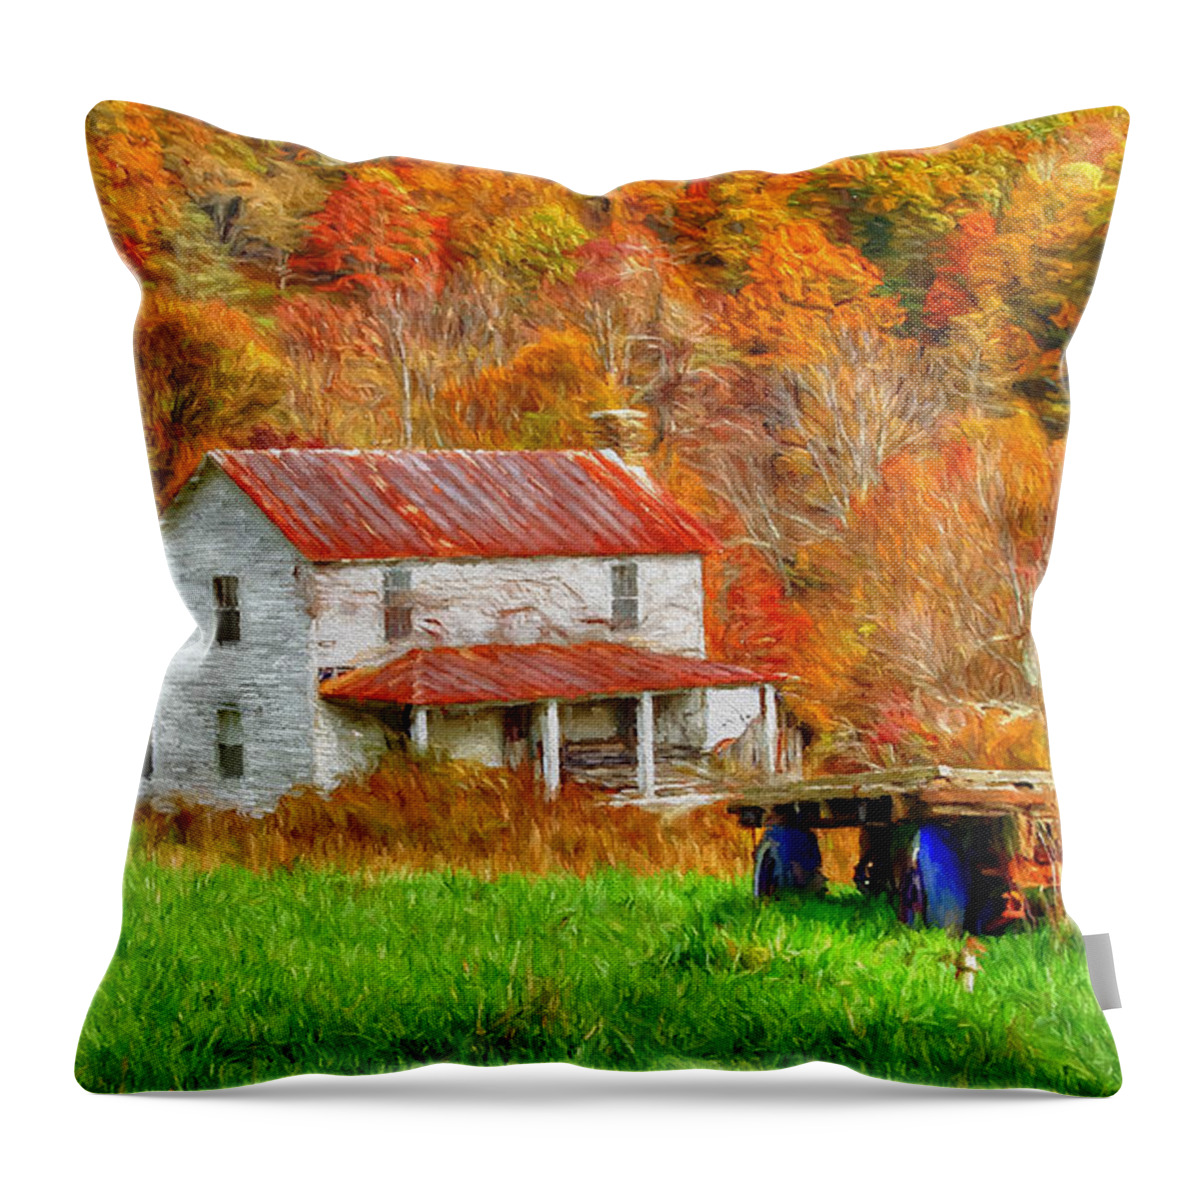 Virginia Throw Pillow featuring the photograph Ole Farm House by Darren Fisher